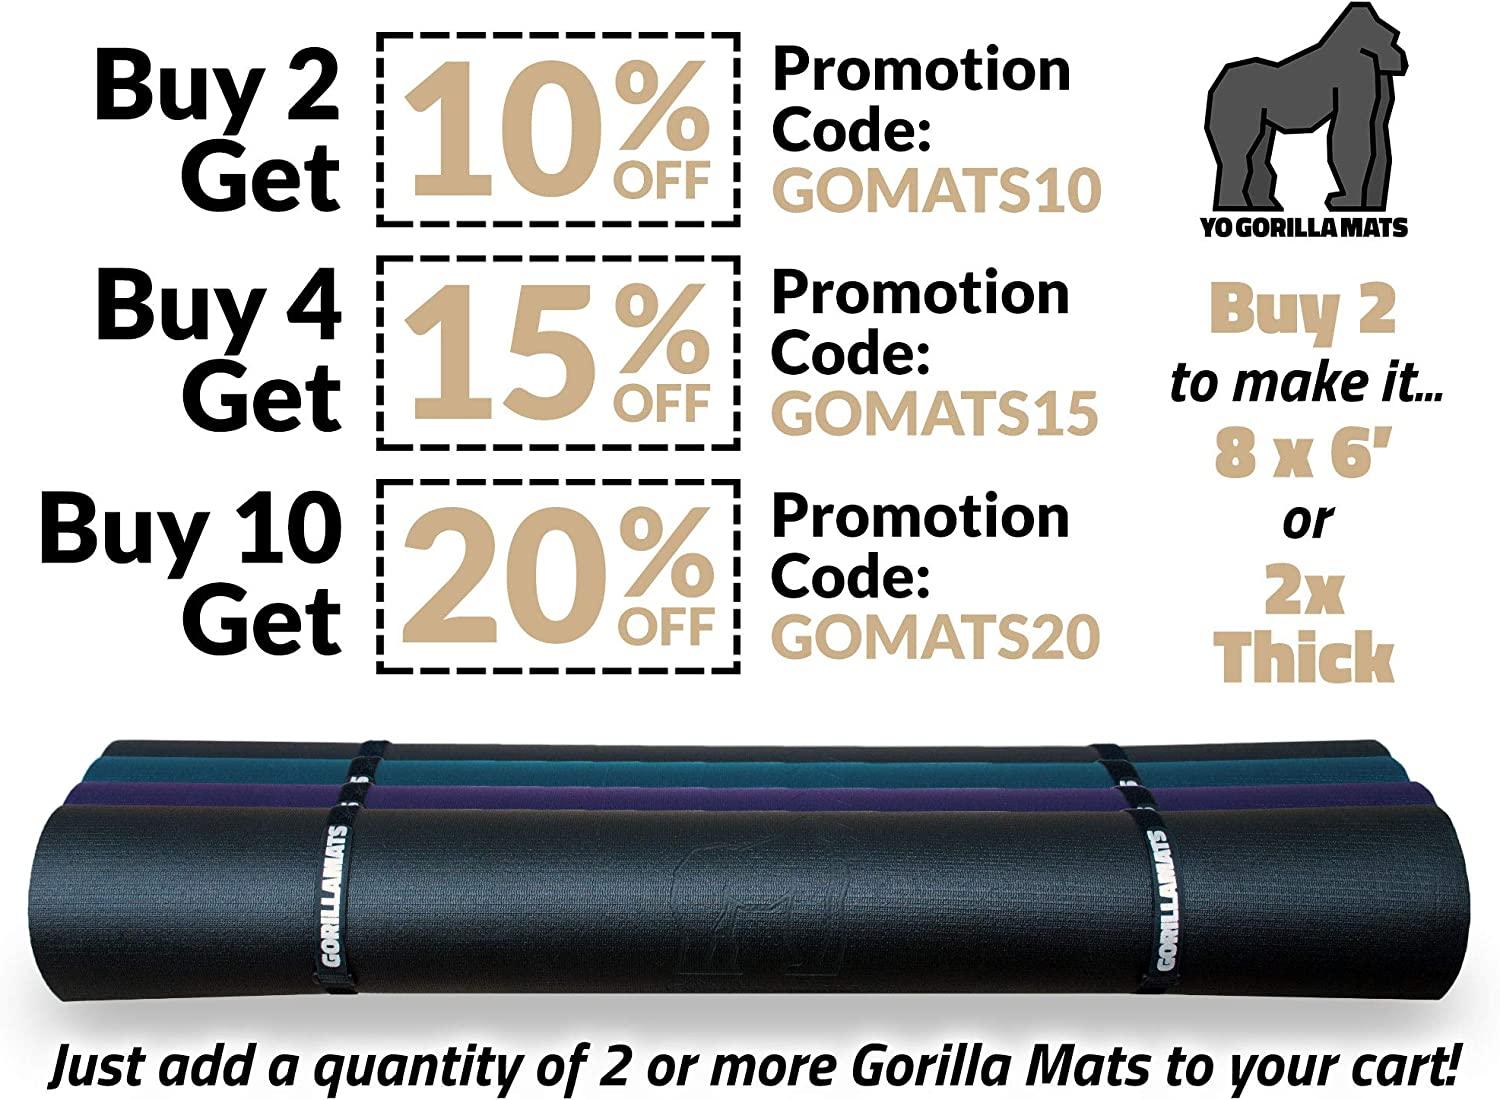  Gorilla Mats Premium Large Yoga Mat – 6' x 4' x 8mm Extra  Thick & Ultra Comfortable, Non-Toxic, Non-Slip Barefoot Exercise Mat –  Works Great on Any Floor for Stretching